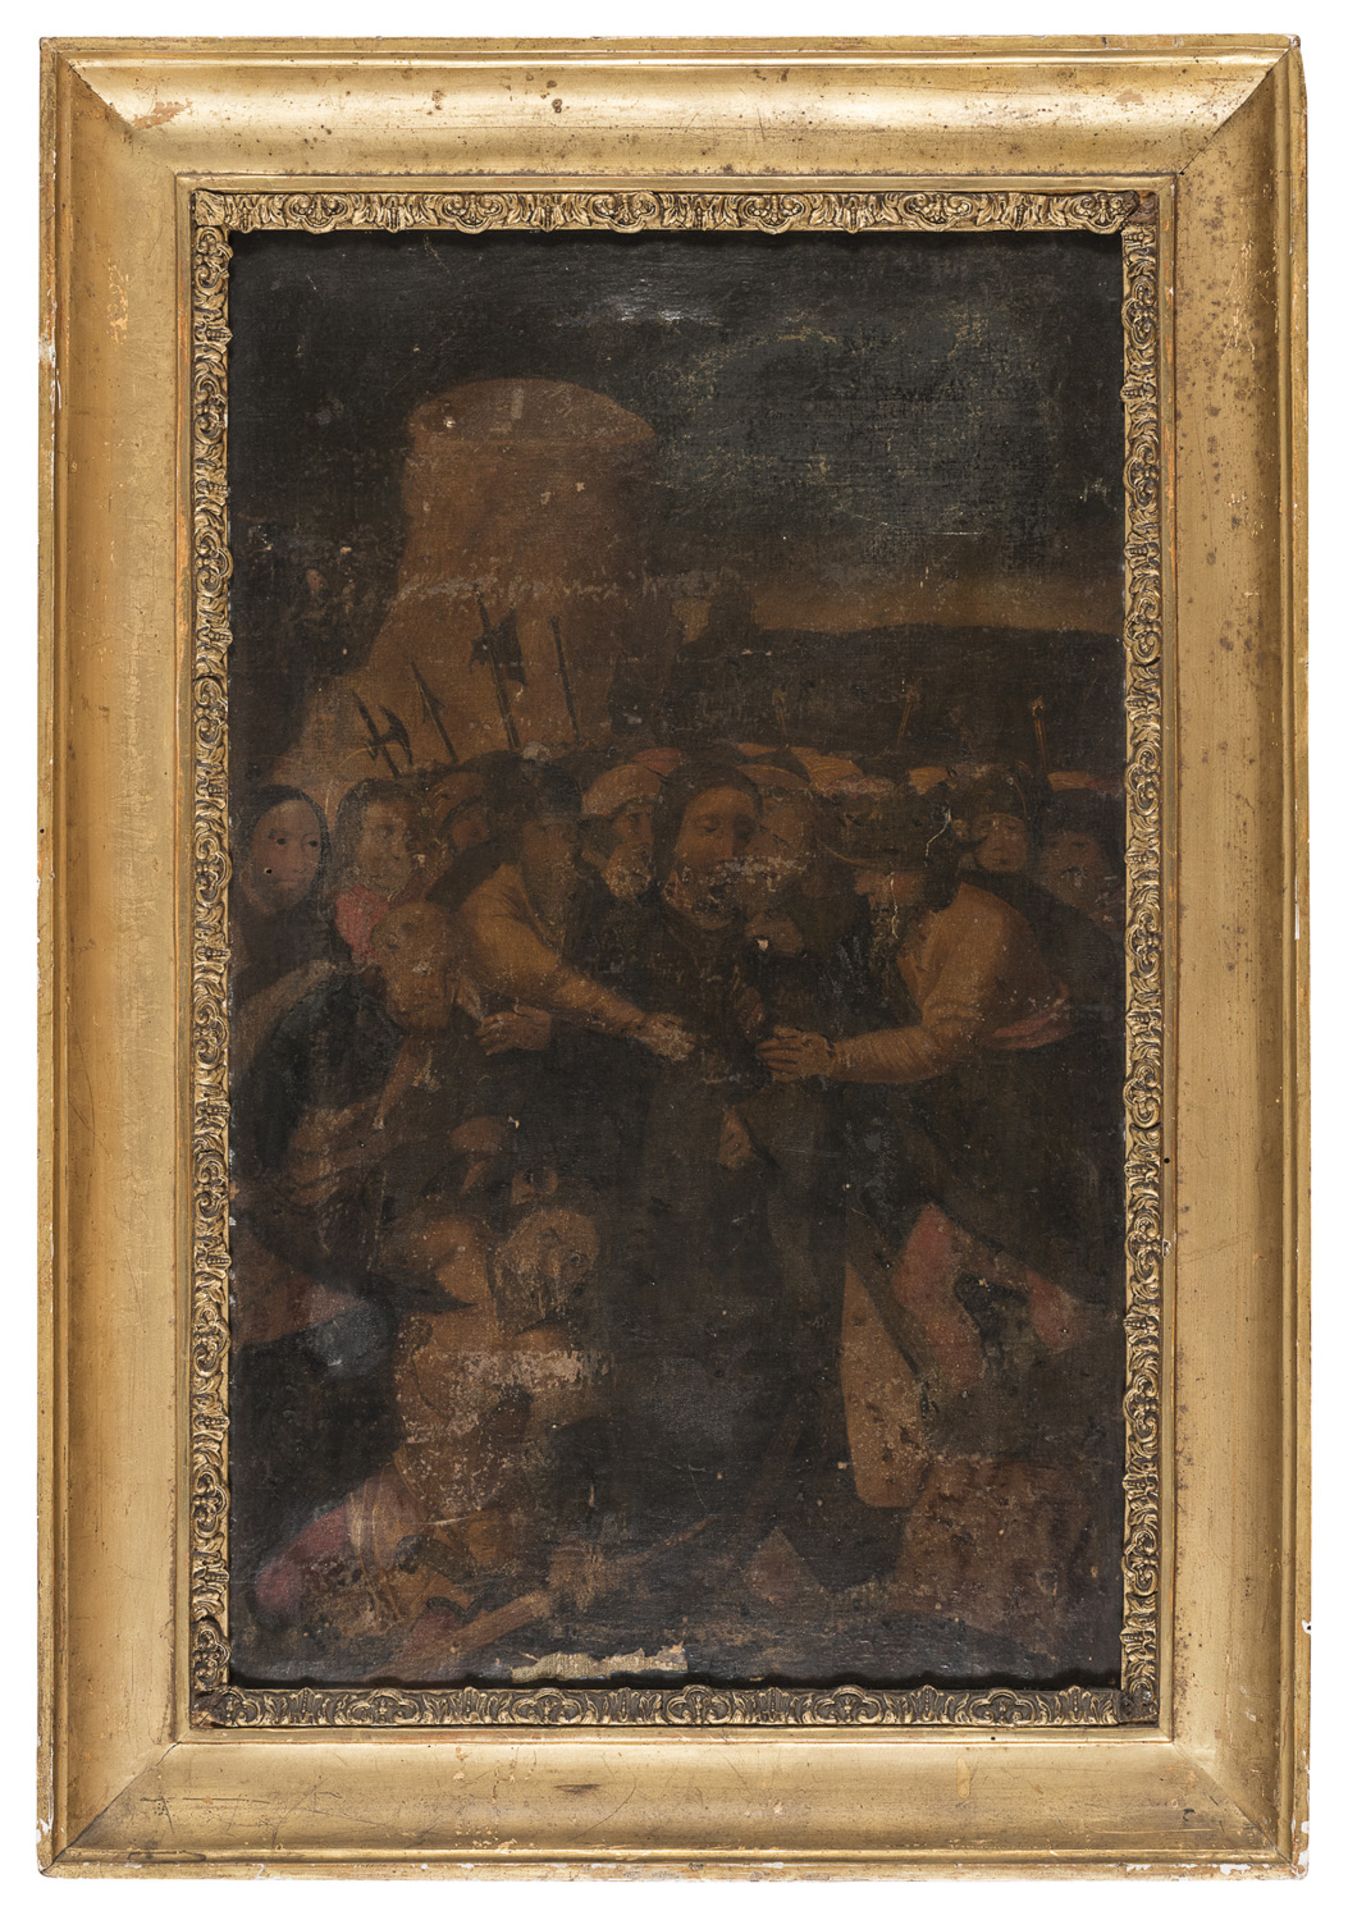 FLEMISH OIL PAINTING OF THE CAPTURE OF CHRIST 18TH CENTURY